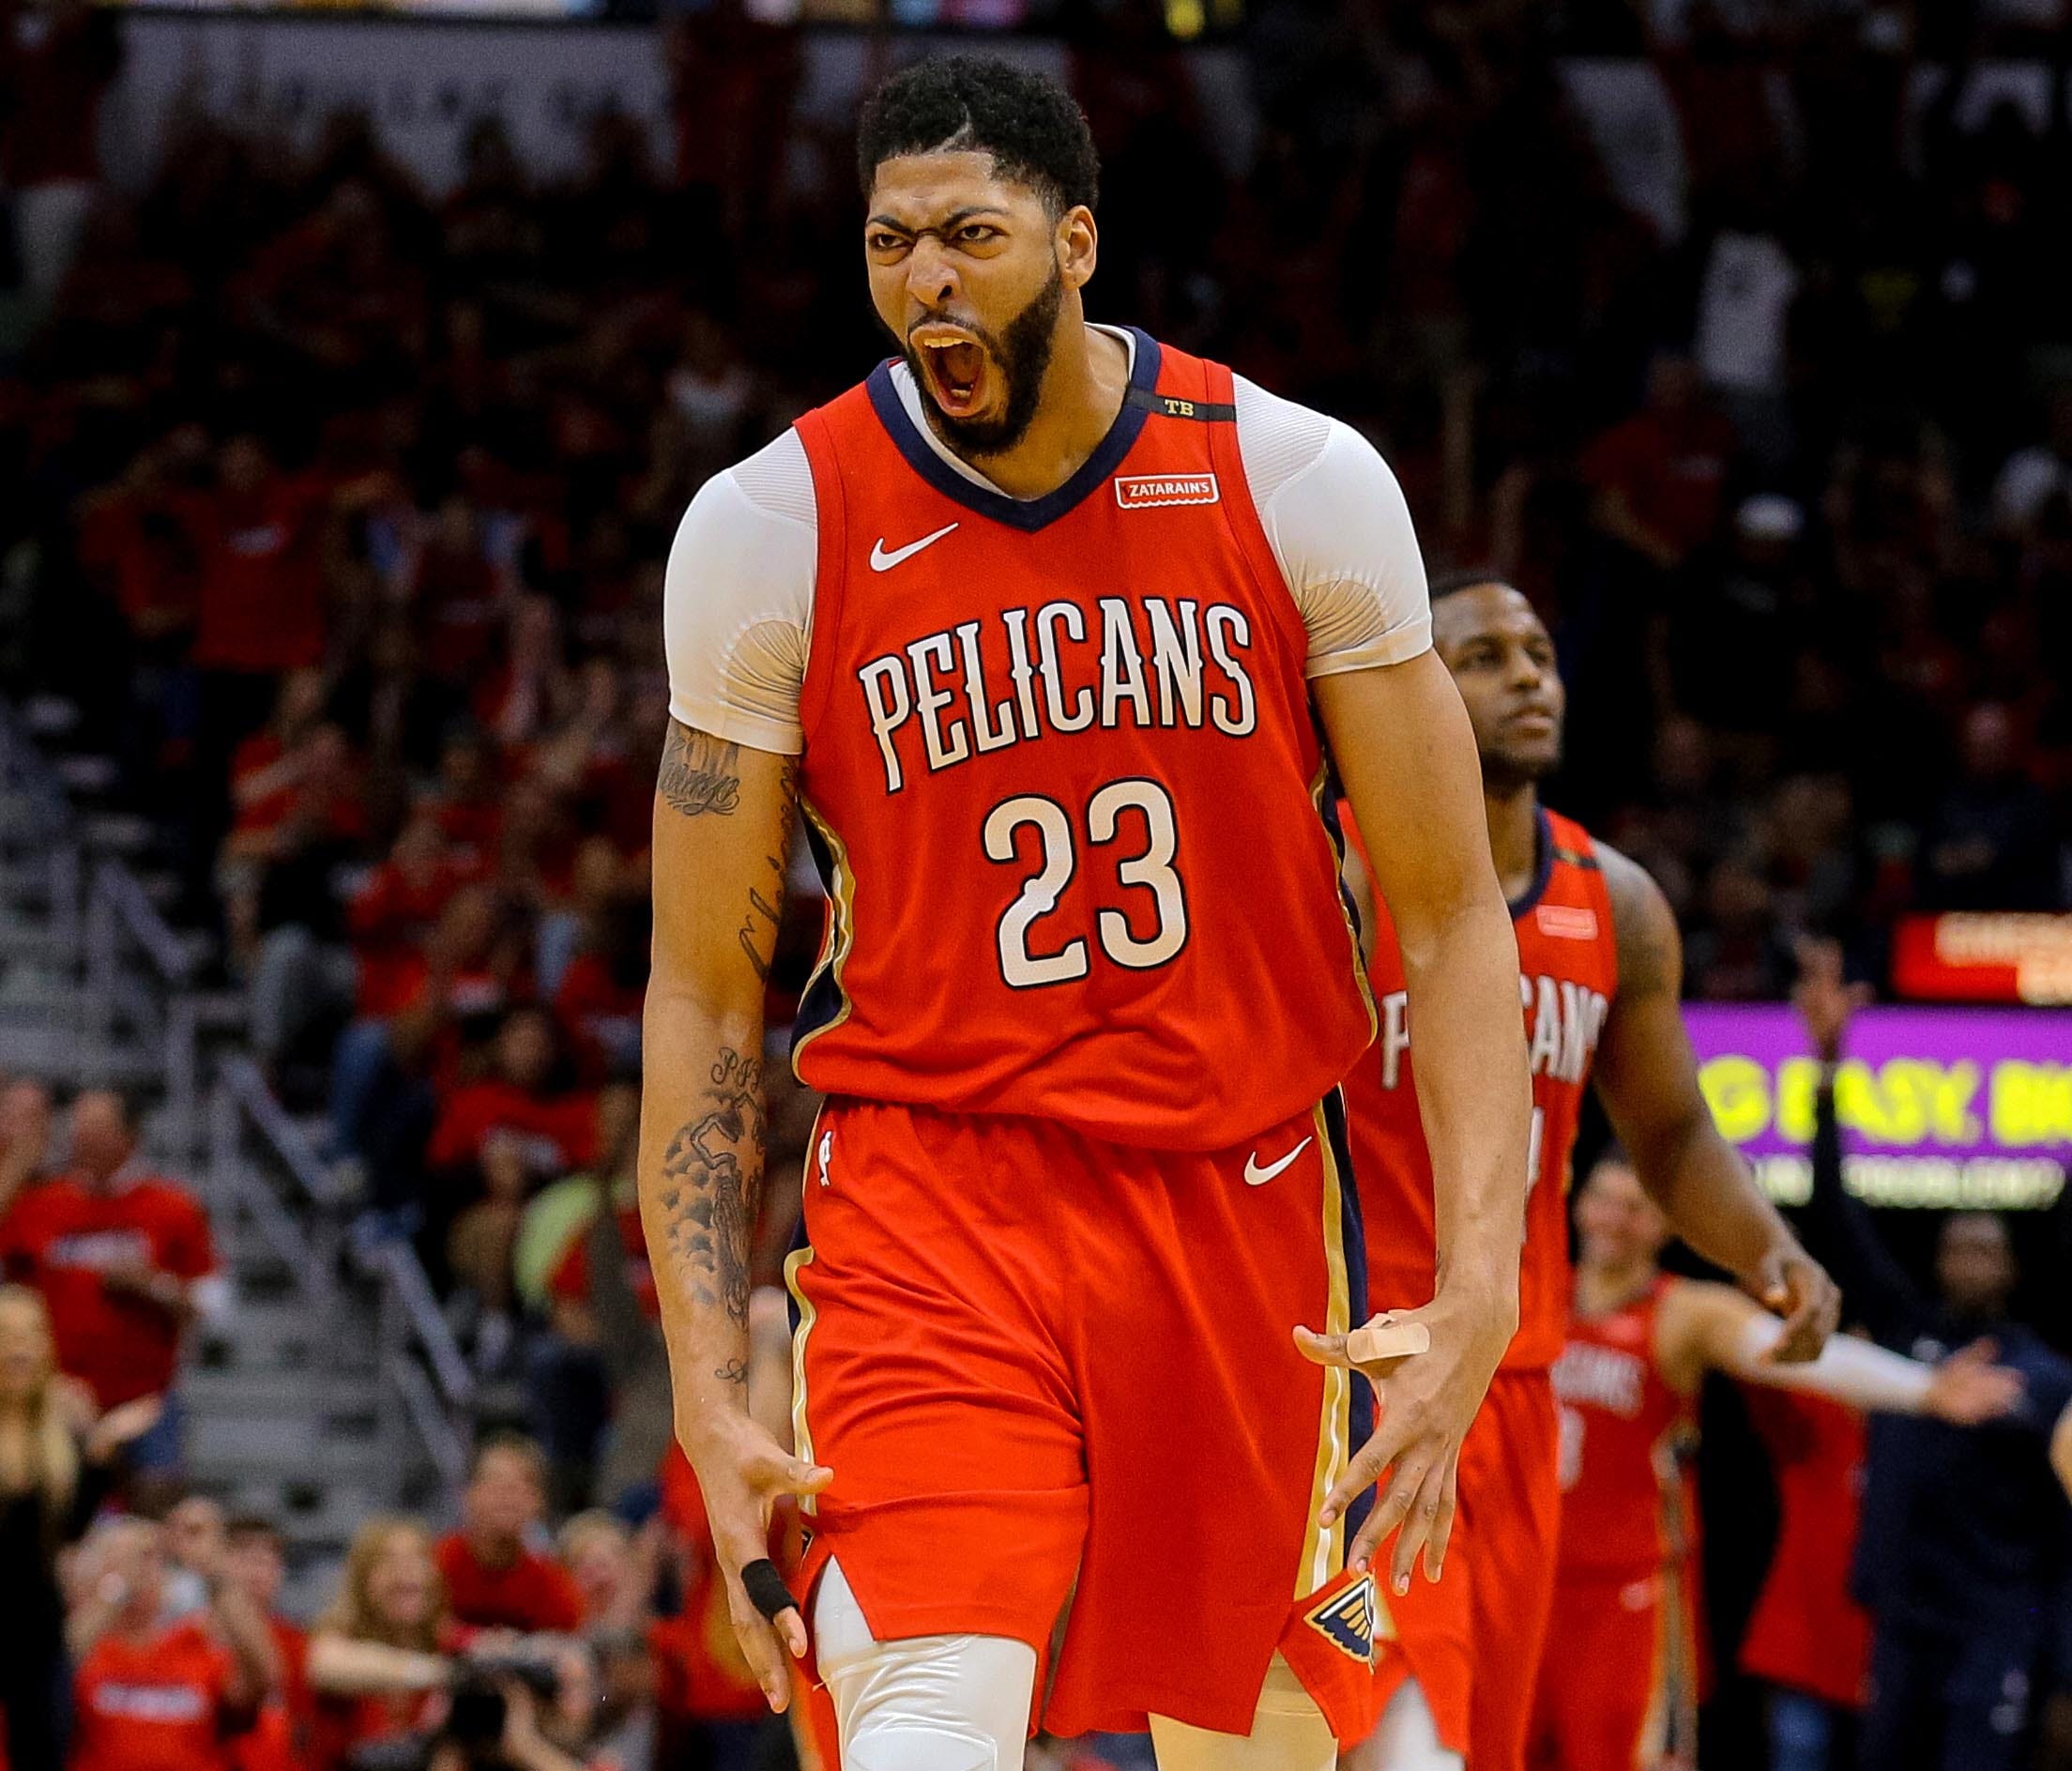 New Orleans Pelicans forward Anthony Davis (23) celebrates during the second half in game three of the first round of the 2018 NBA Playoffs against the Portland Trail Blazers at the Smoothie King Center.